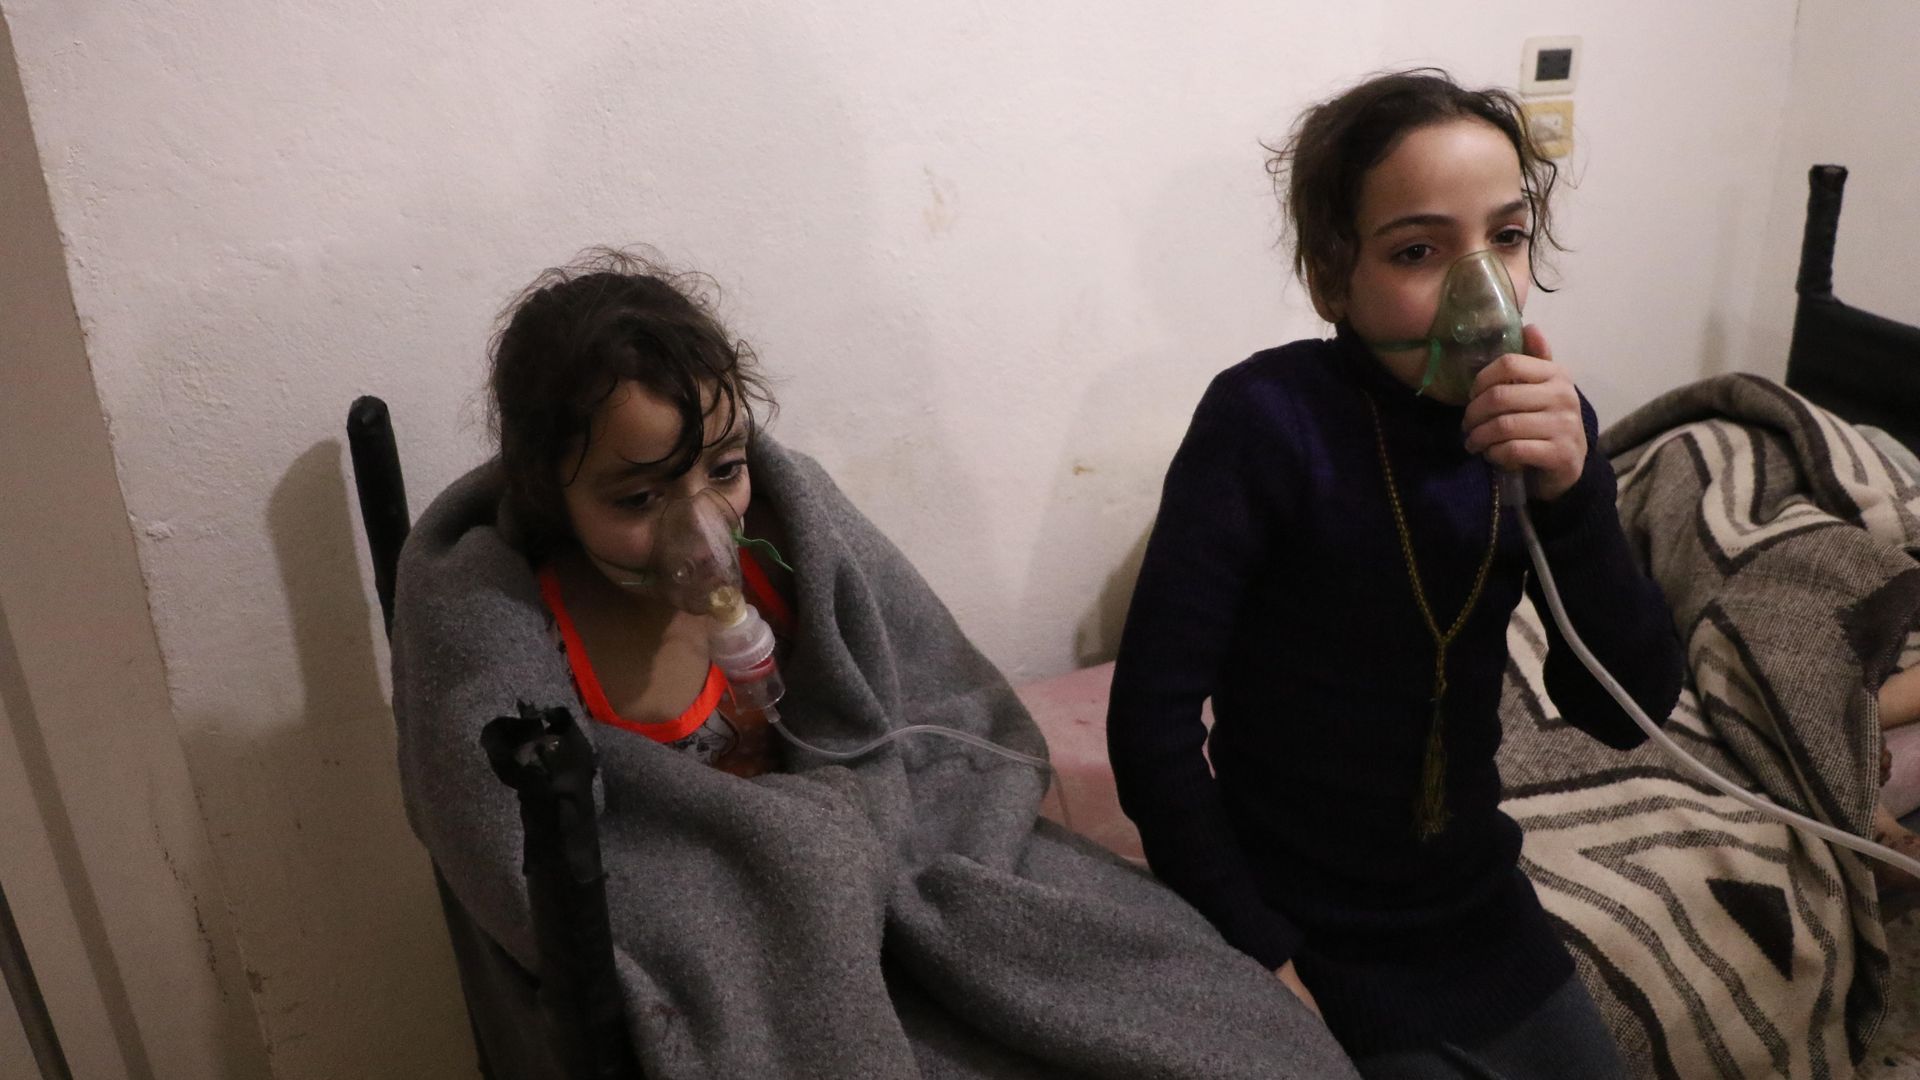 Affected children receive medical treatment after Assad regime forces conduct allegedly poisonous gas attack in Eastern Ghouta on March 7. 